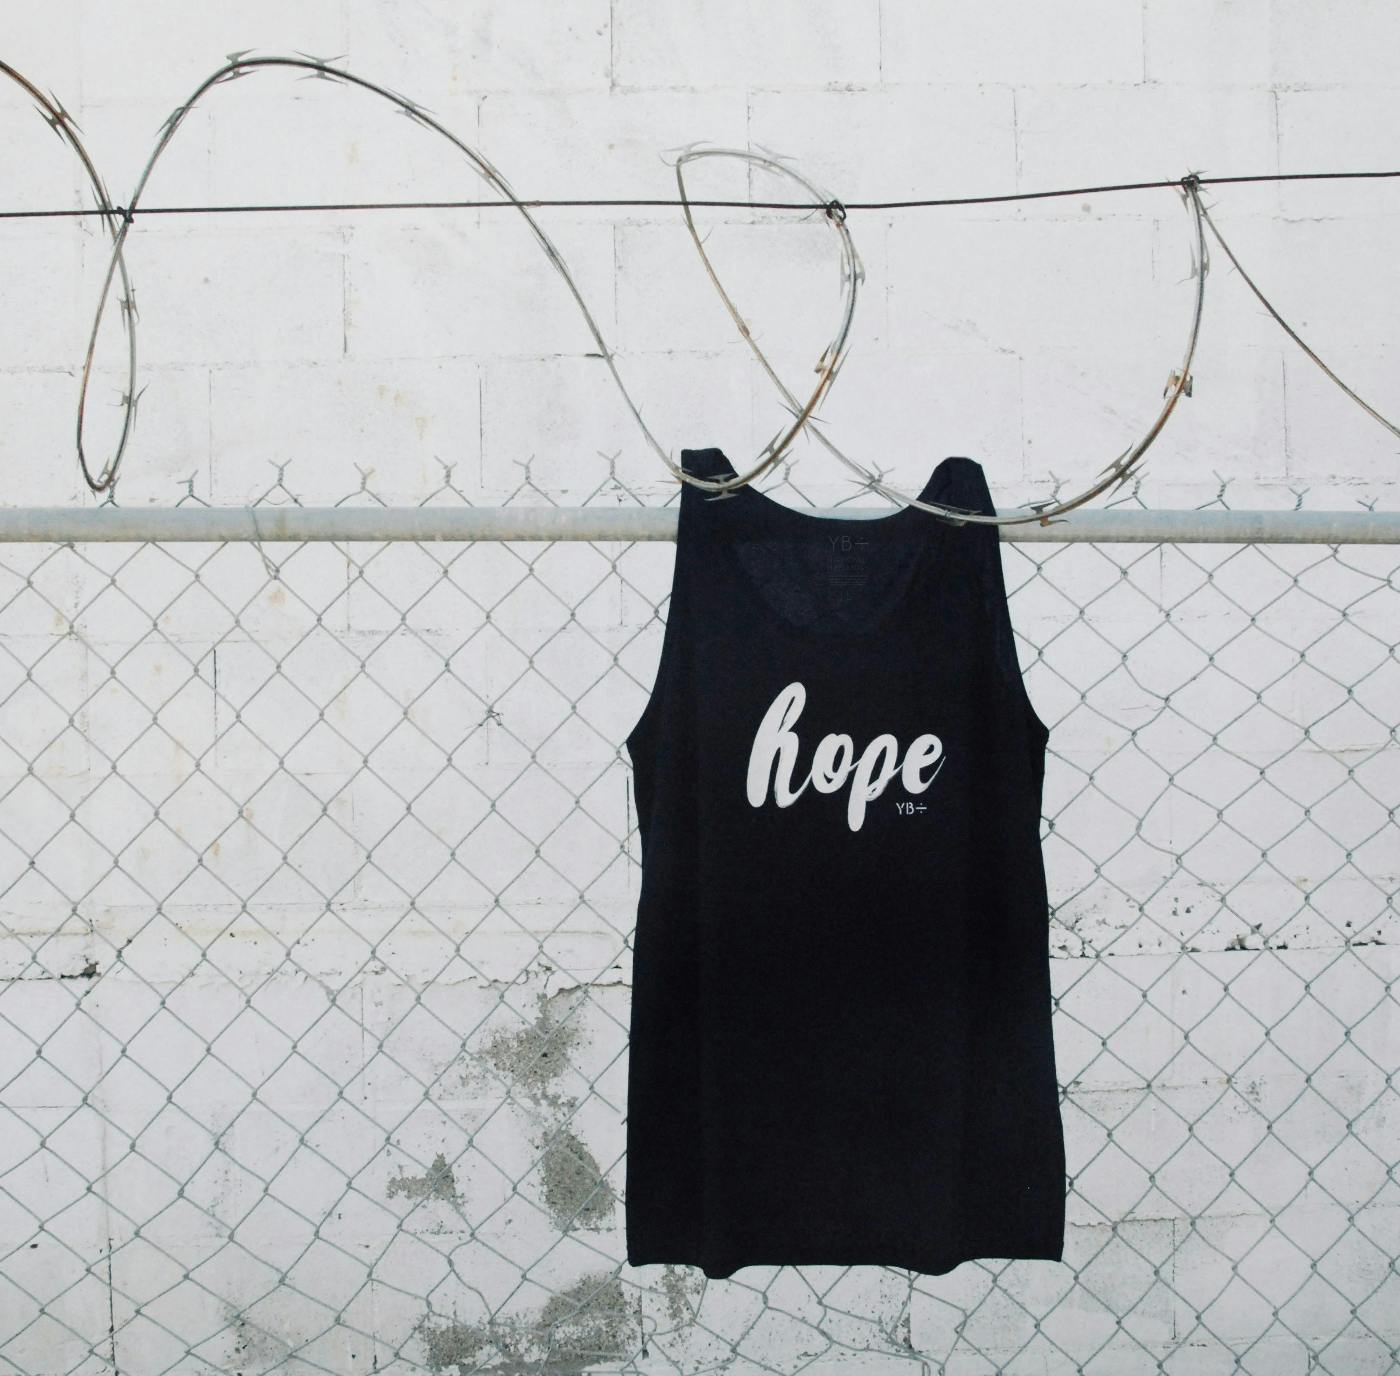 A fence with razor wire on top and a black t-shirt with the word hope hanging on the razor wire